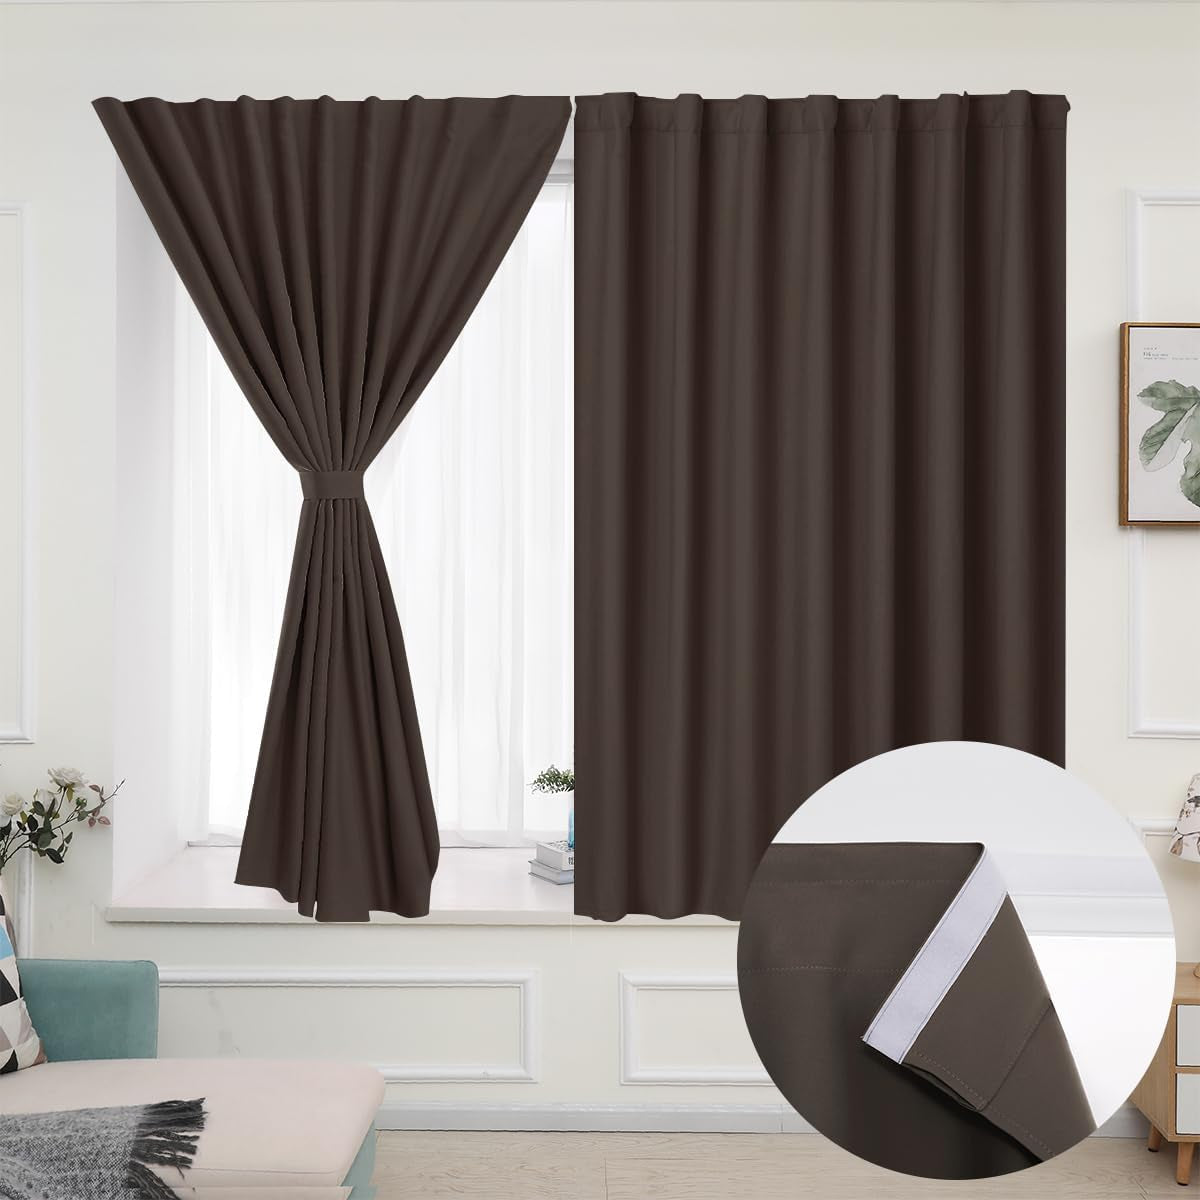 Muamar 2Pcs Blackout Curtains Privacy Curtains 63 Inch Length Window Curtains,Easy Install Thermal Insulated Window Shades,Stick Curtains No Rods, Black 42" W X 63" L  Muamar Coffee 42"W X 63"L 